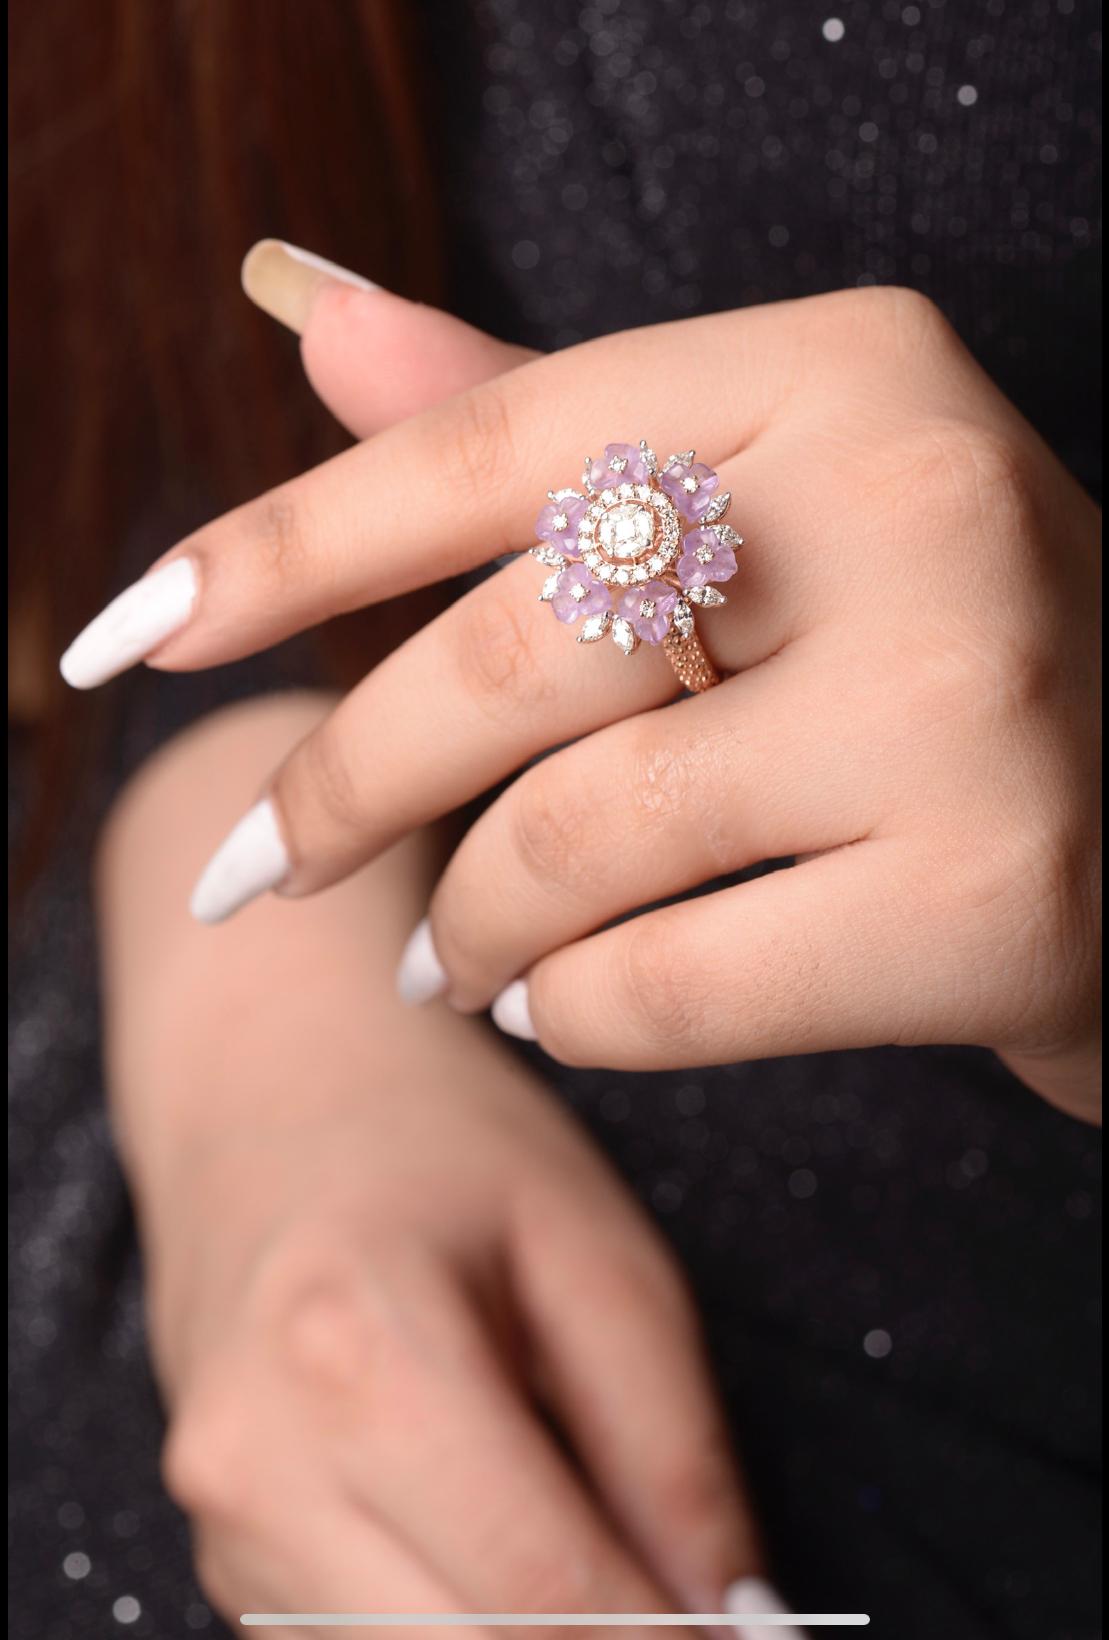 This Dazzling 18K Ring  consists of diamonds and amethyst Flowers